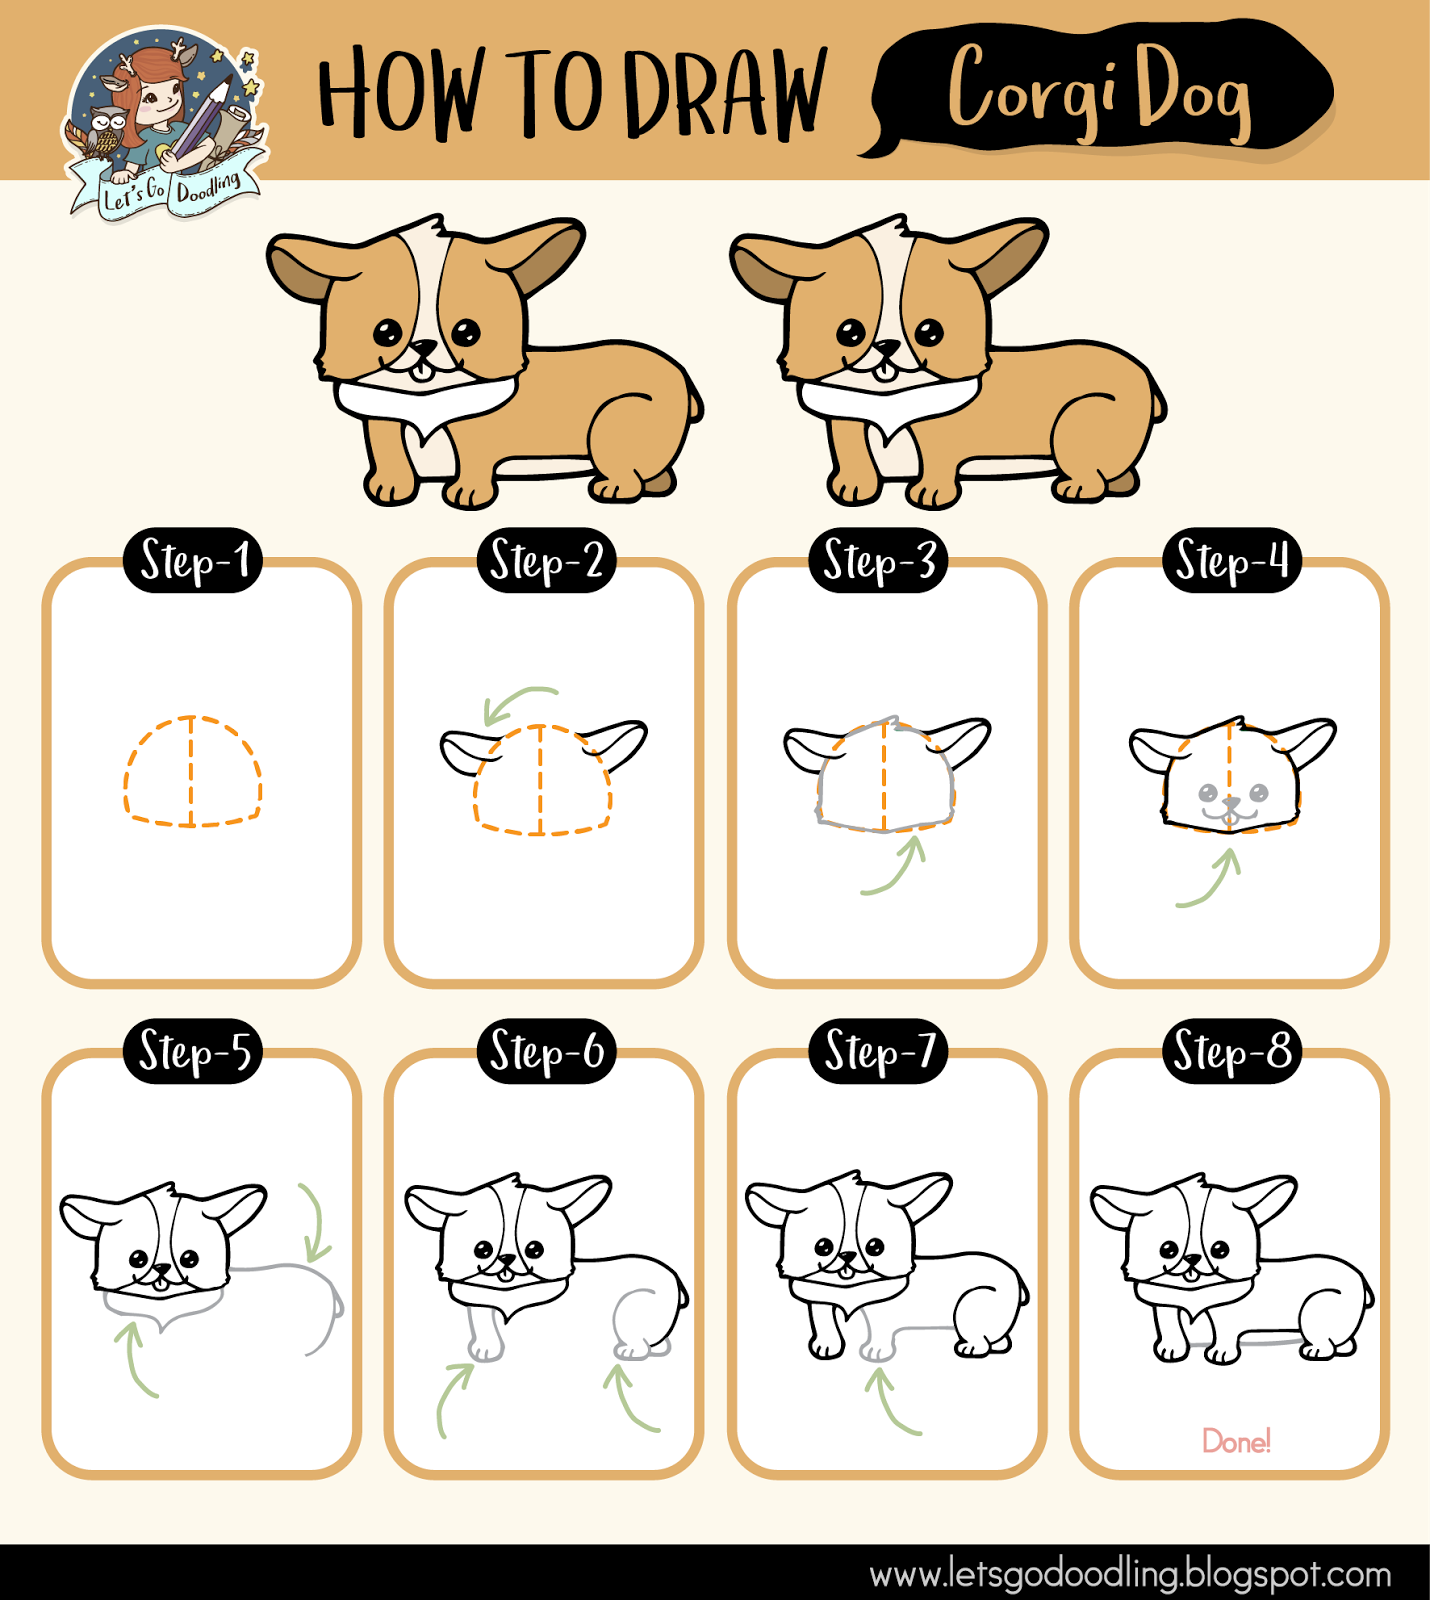 How To Draw Corgi Dog - Easy Step By Step Drawing Tutorial